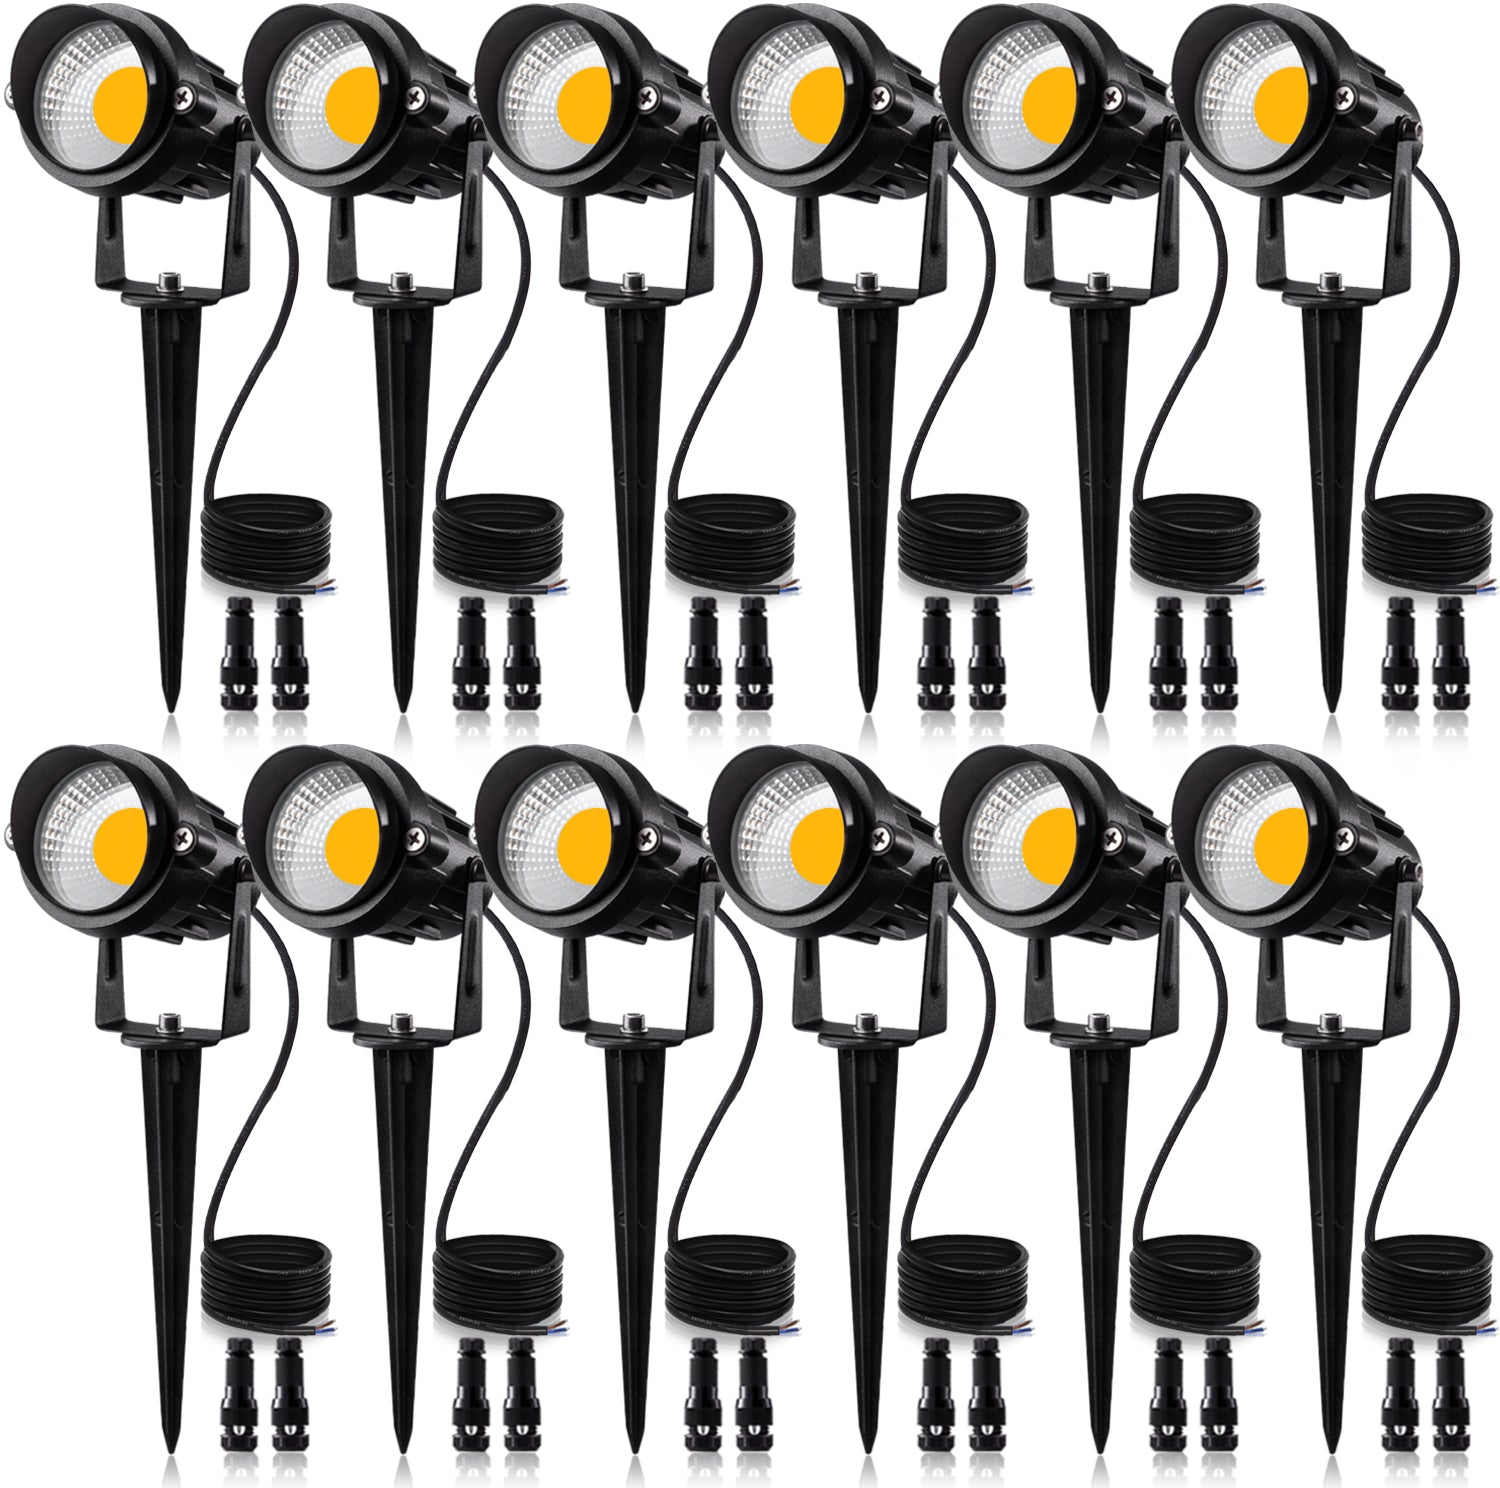 LEDVIE LED Landscape Lights, 12 Pack 7W LED Ground Lights with 24  Connectors Low Voltage In Ground Well Lights Pathway Lights Warm White,  Waterproof